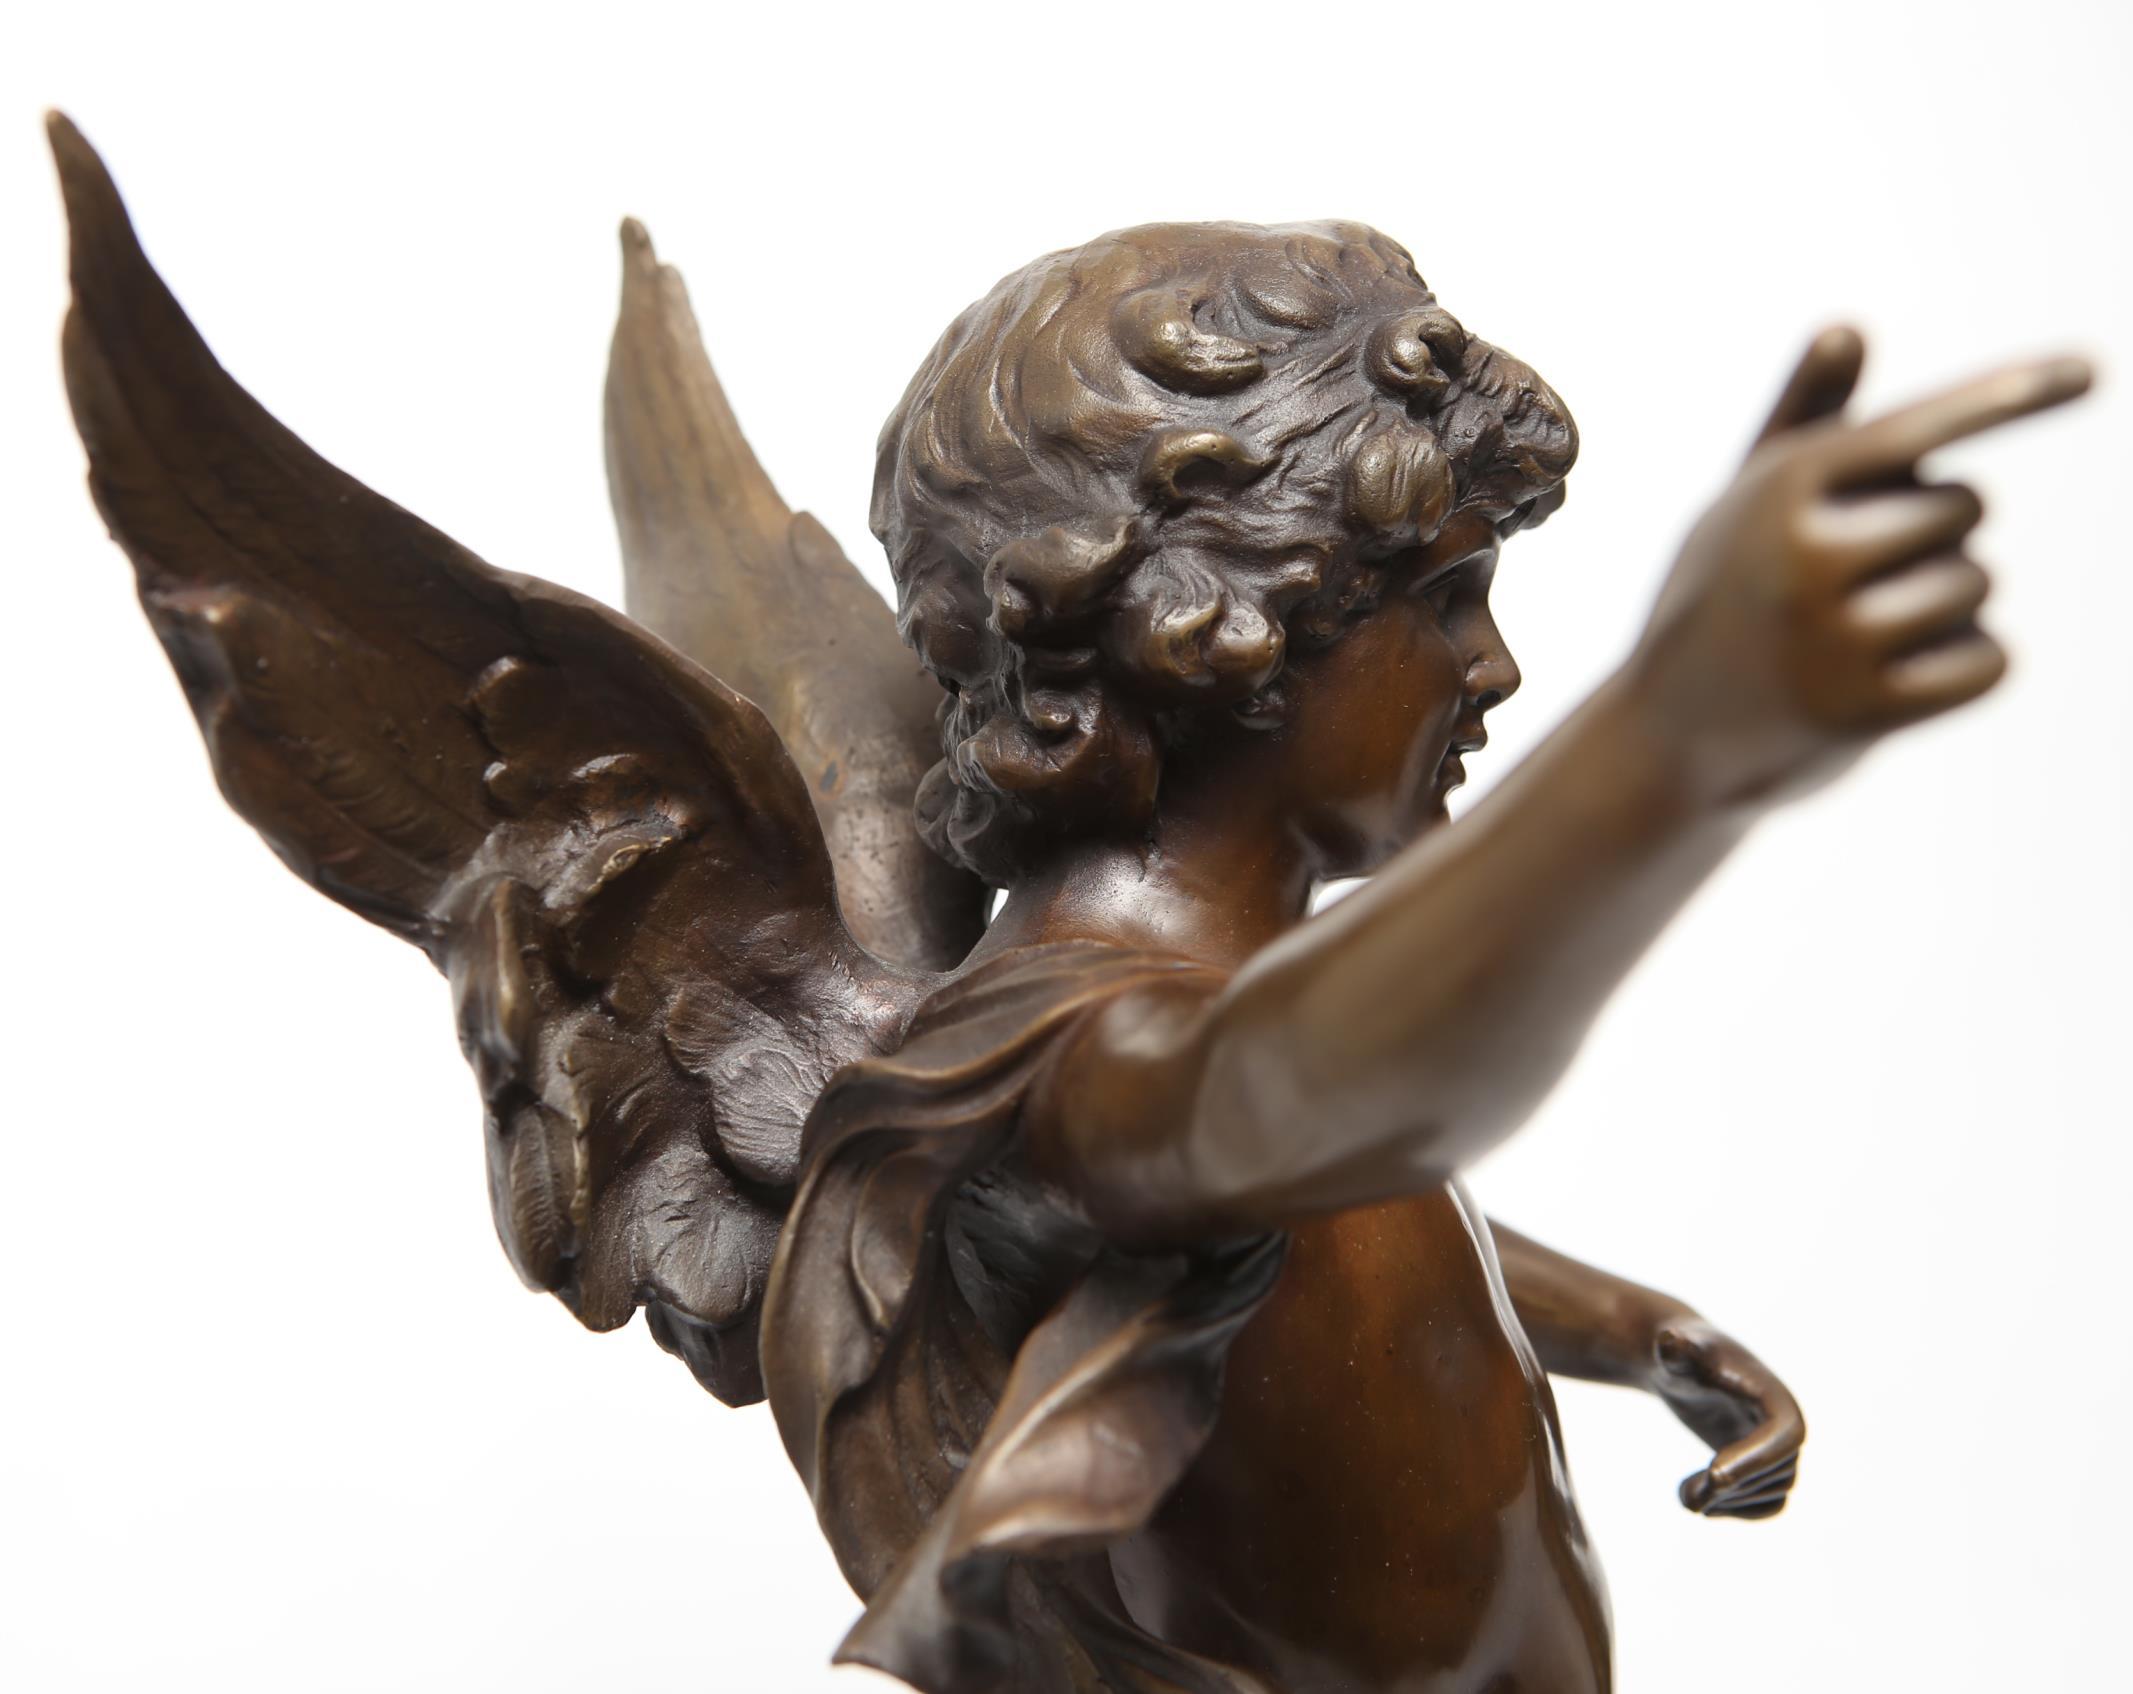 20th Century French Neoclassical Revival 'Cupidon' Bronze Sculpture after Auguste Moreau